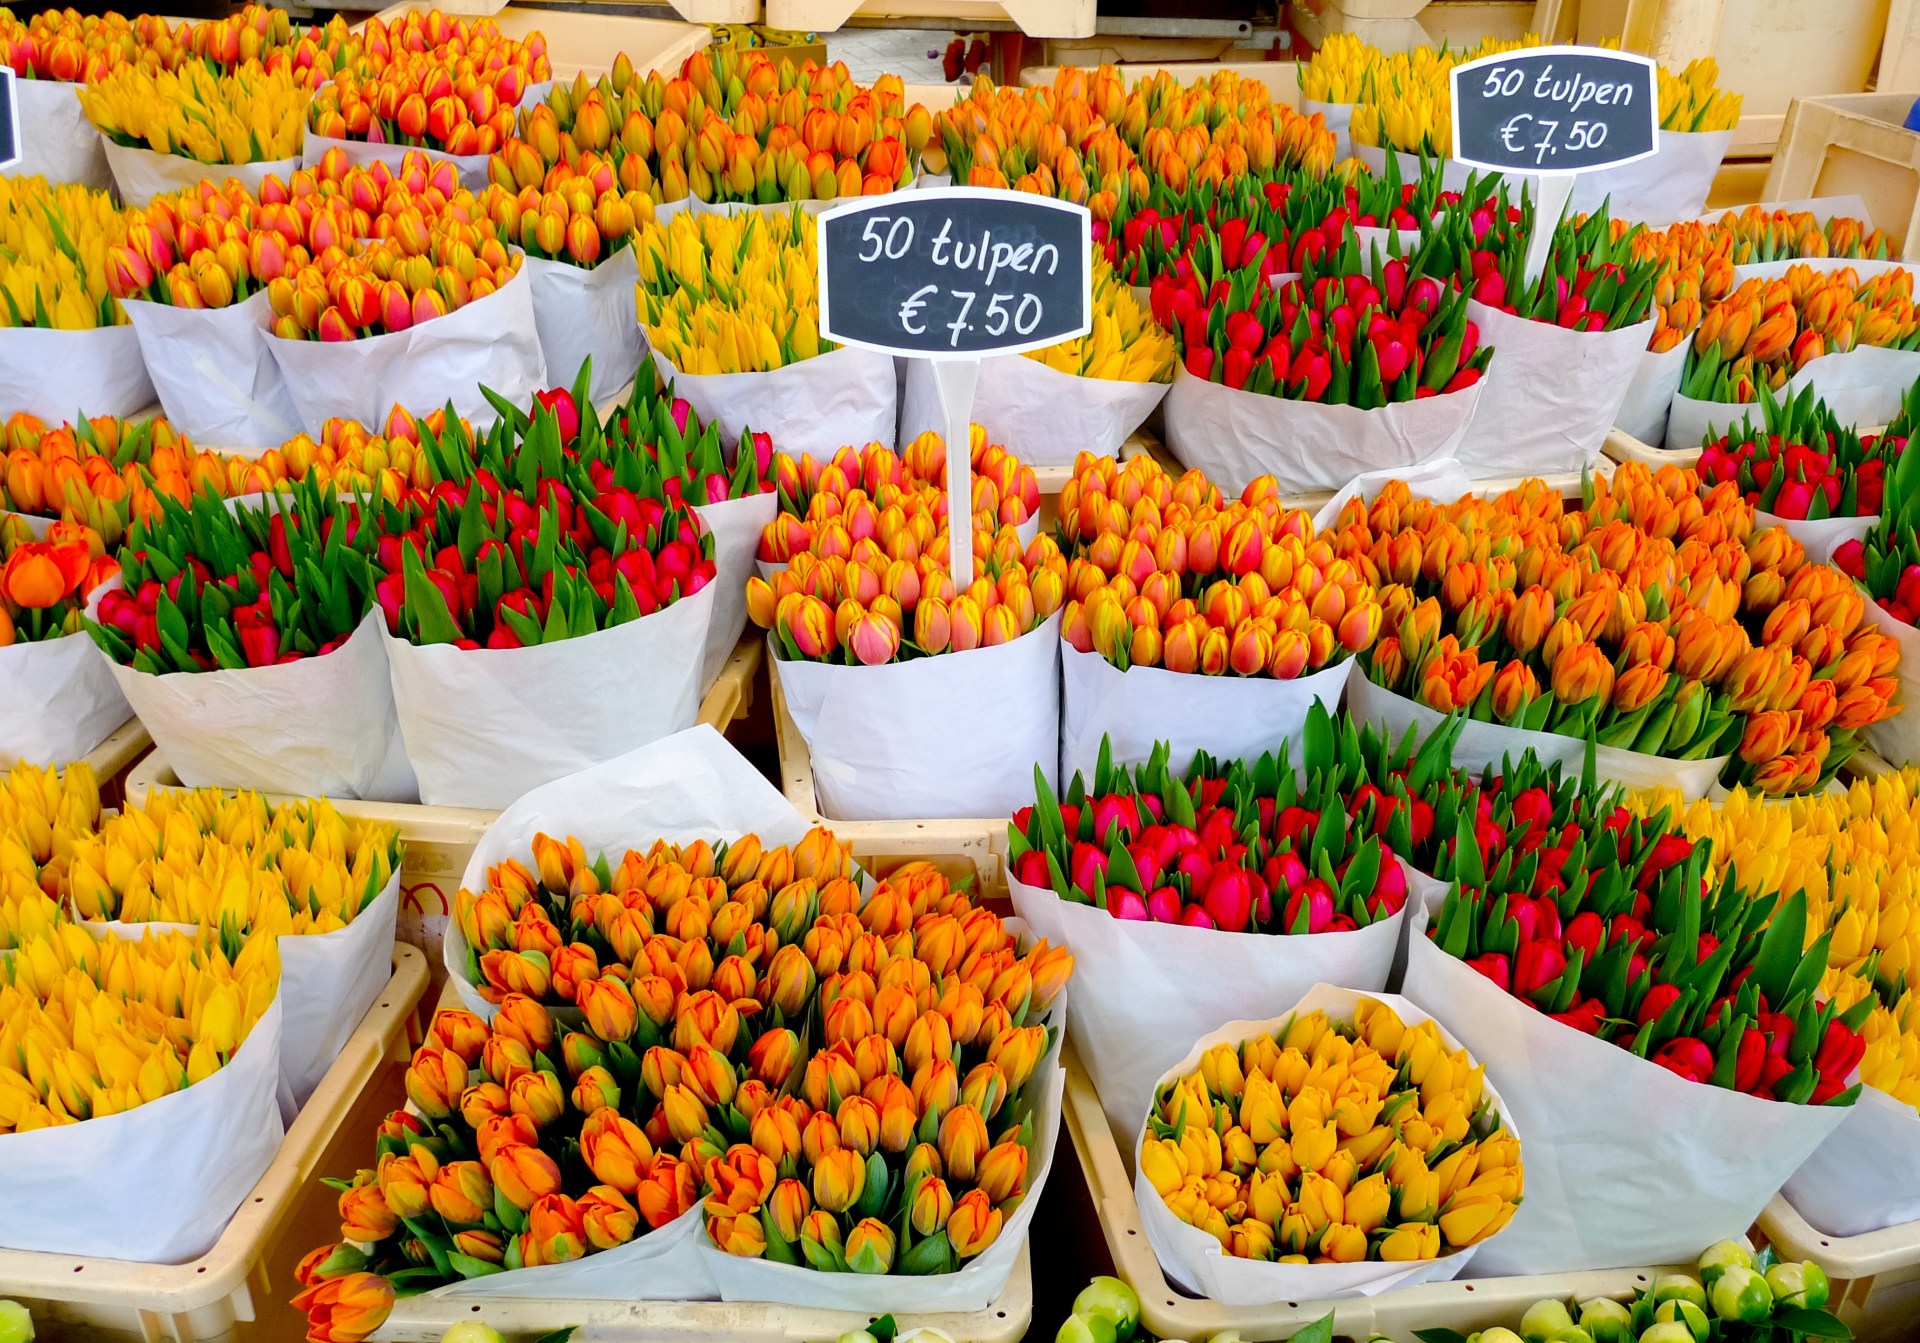 Colorful tulips on sale in Amsterdam flower market Photo Credit - Mario Savoia/Shutterstock